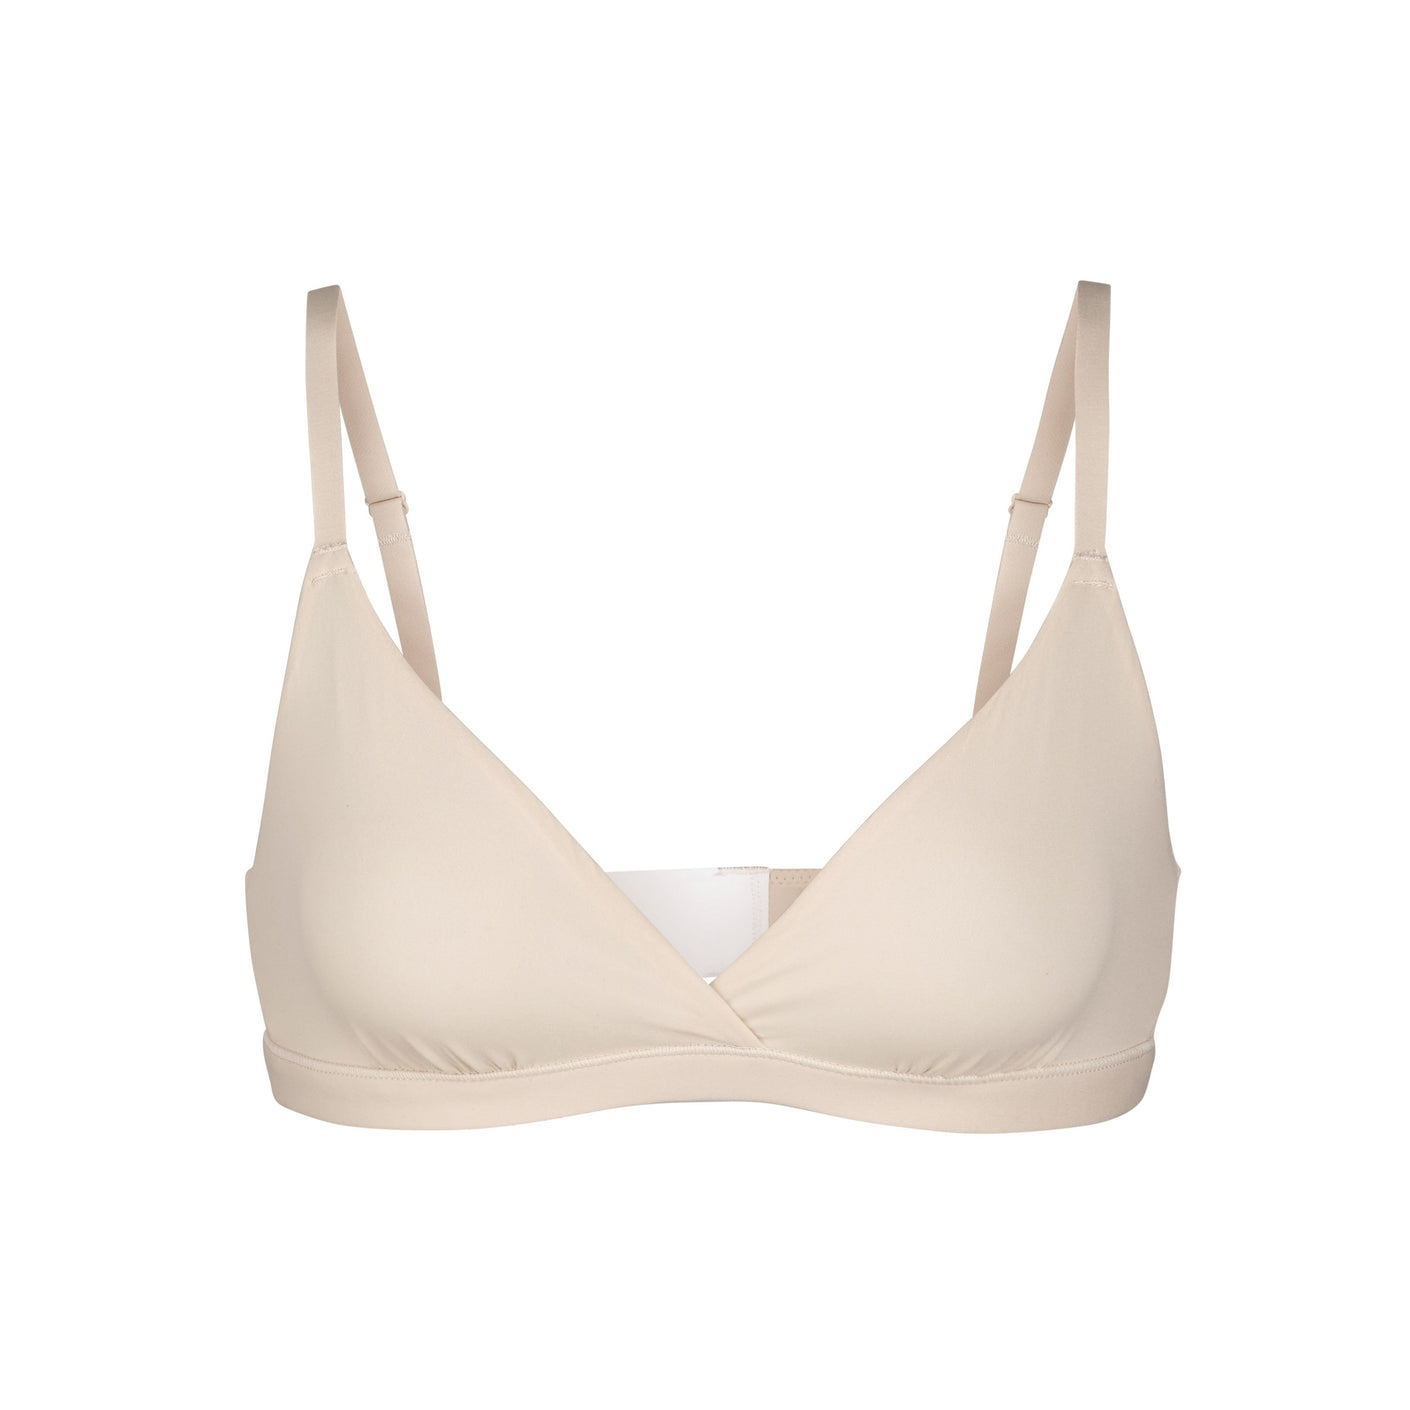 Lace Triangle Bralette Sand  The Best Bralette for Small Busts